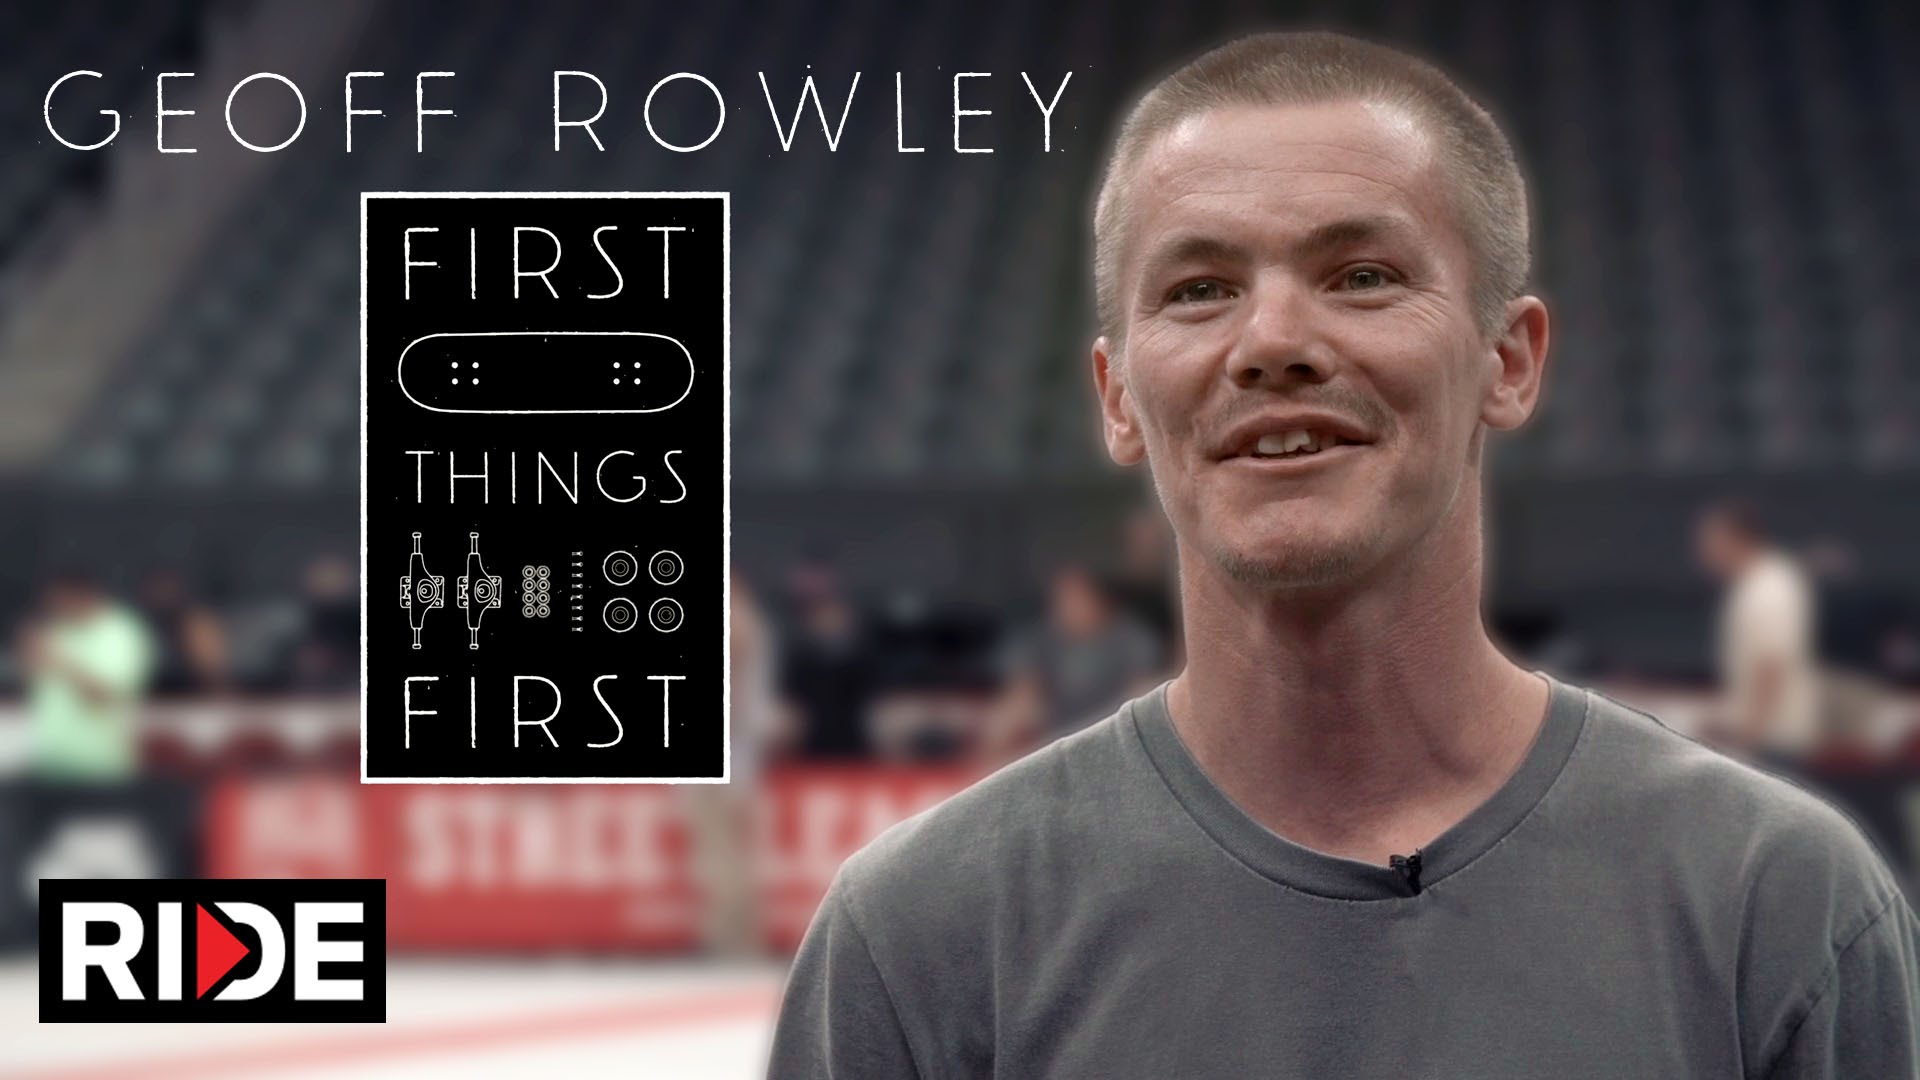 This is the first thing. Geoff Rowley. Стефен Джофф.